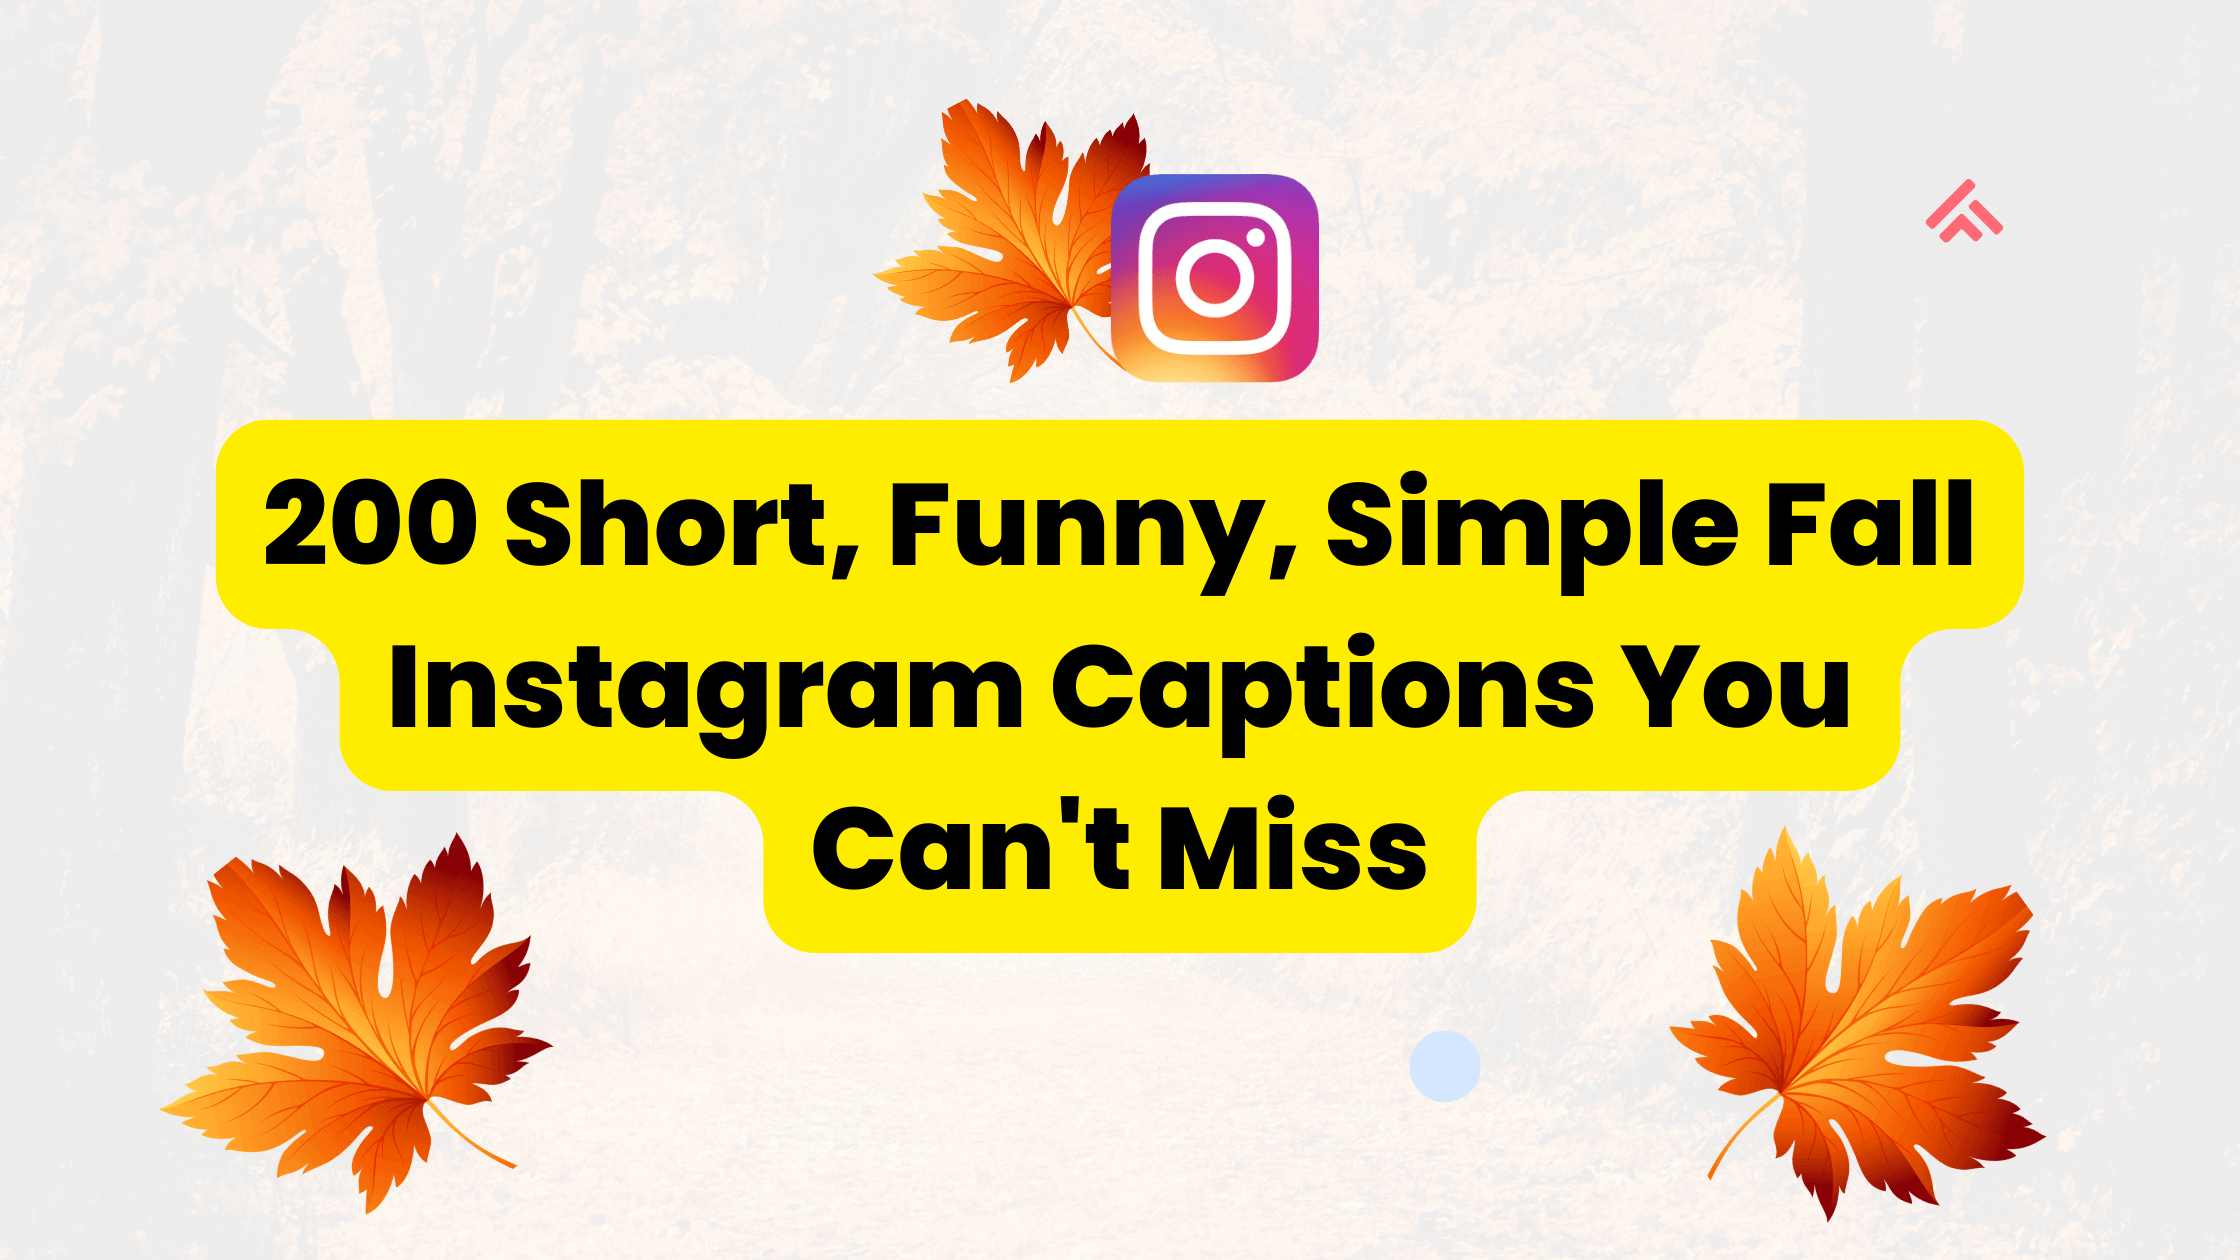 200 Short, funny , cool Fall Instagram Captions You Can't Miss